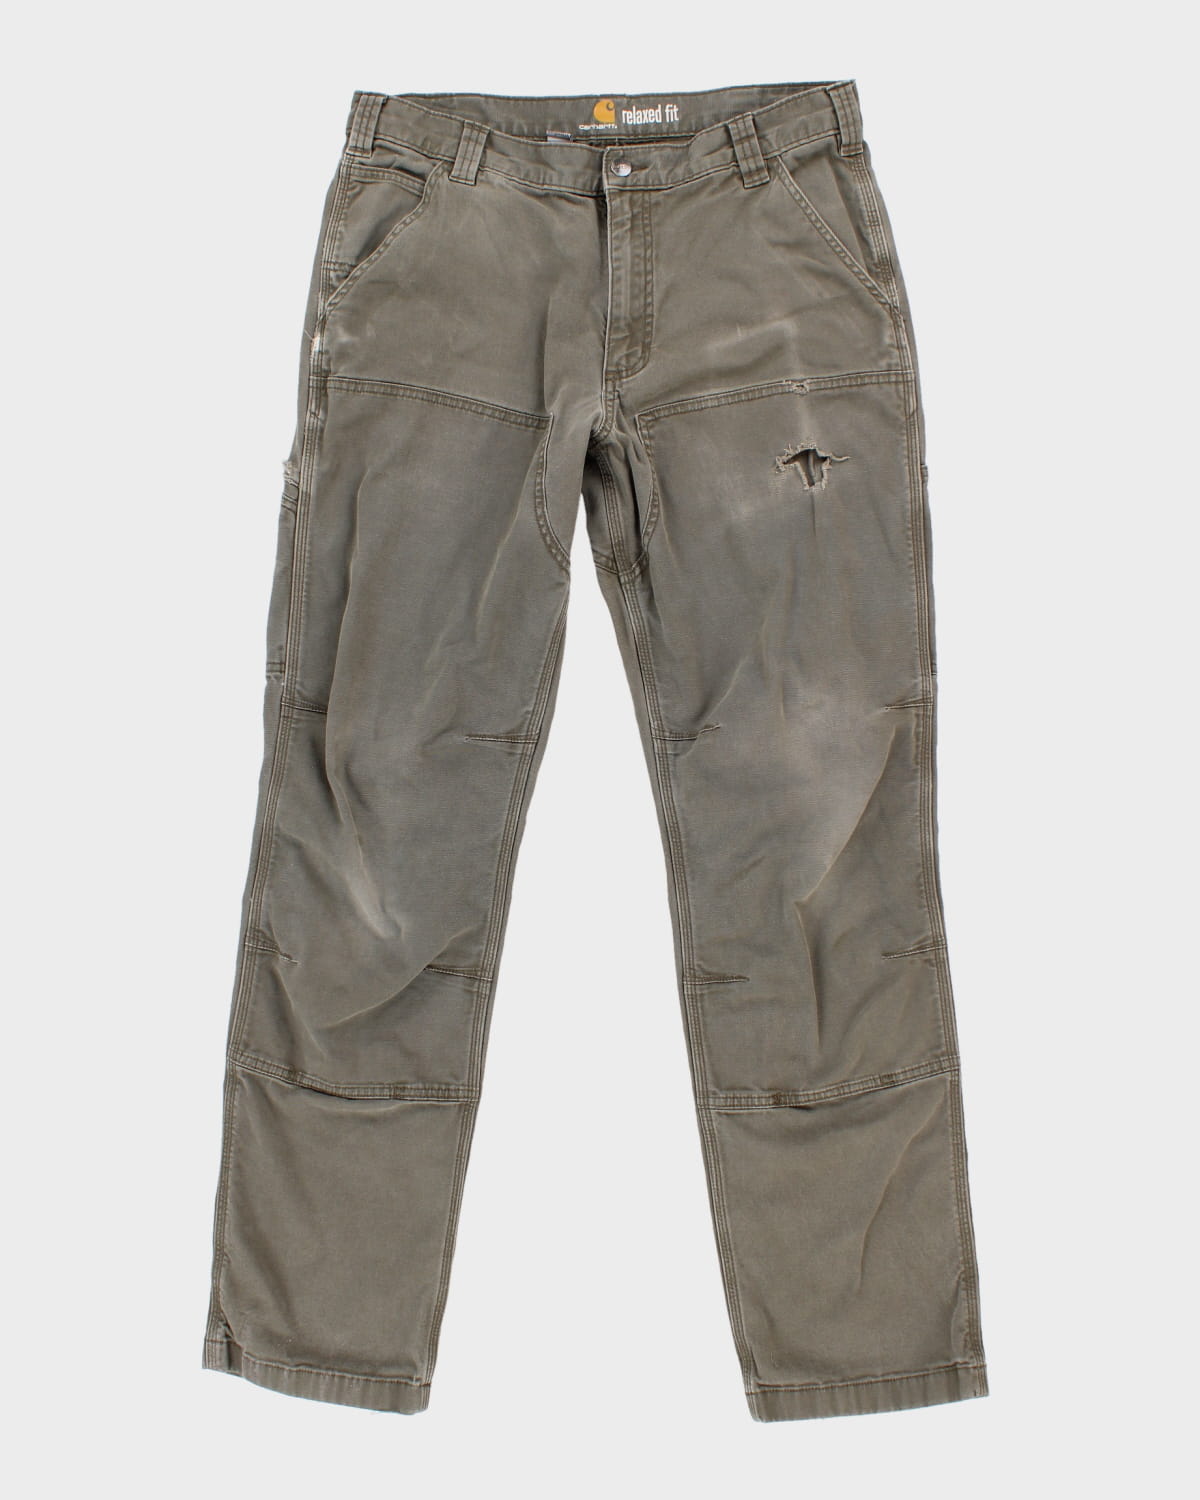 Carhartt Thrashed Double Knee Carpenter Trousers - W34 L34